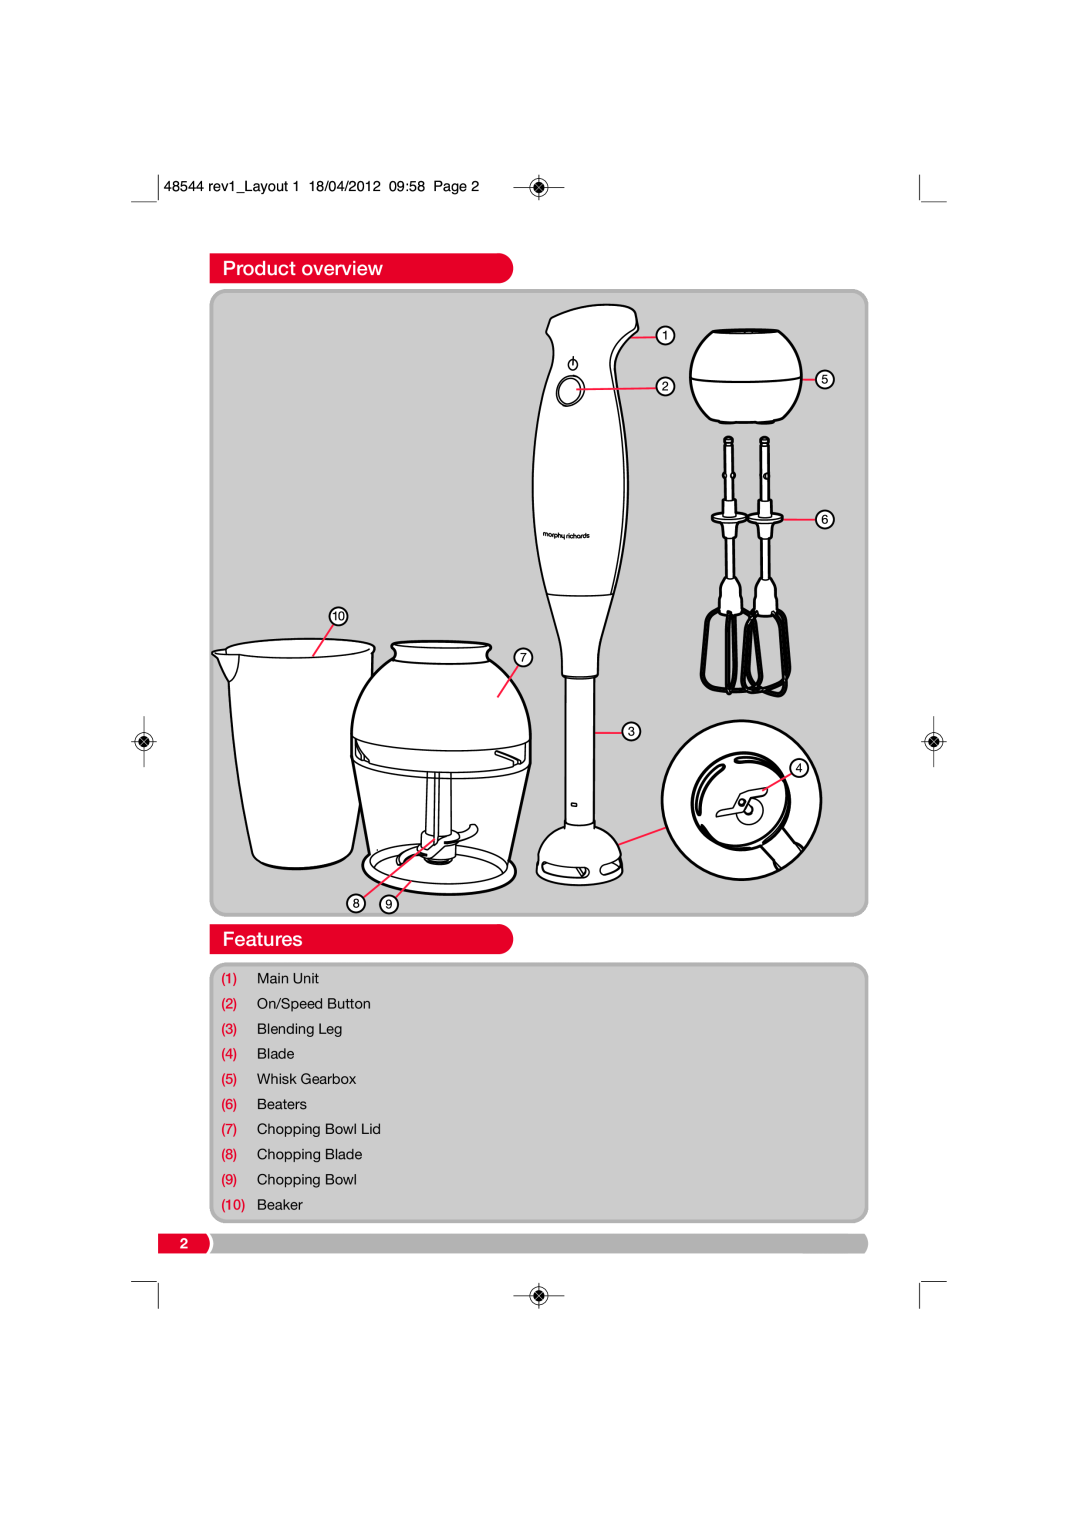 Morphy Richards manual Product overview, Features, 48544 rev1Layout 1 18/04/2012 0958 Page, Beaker 